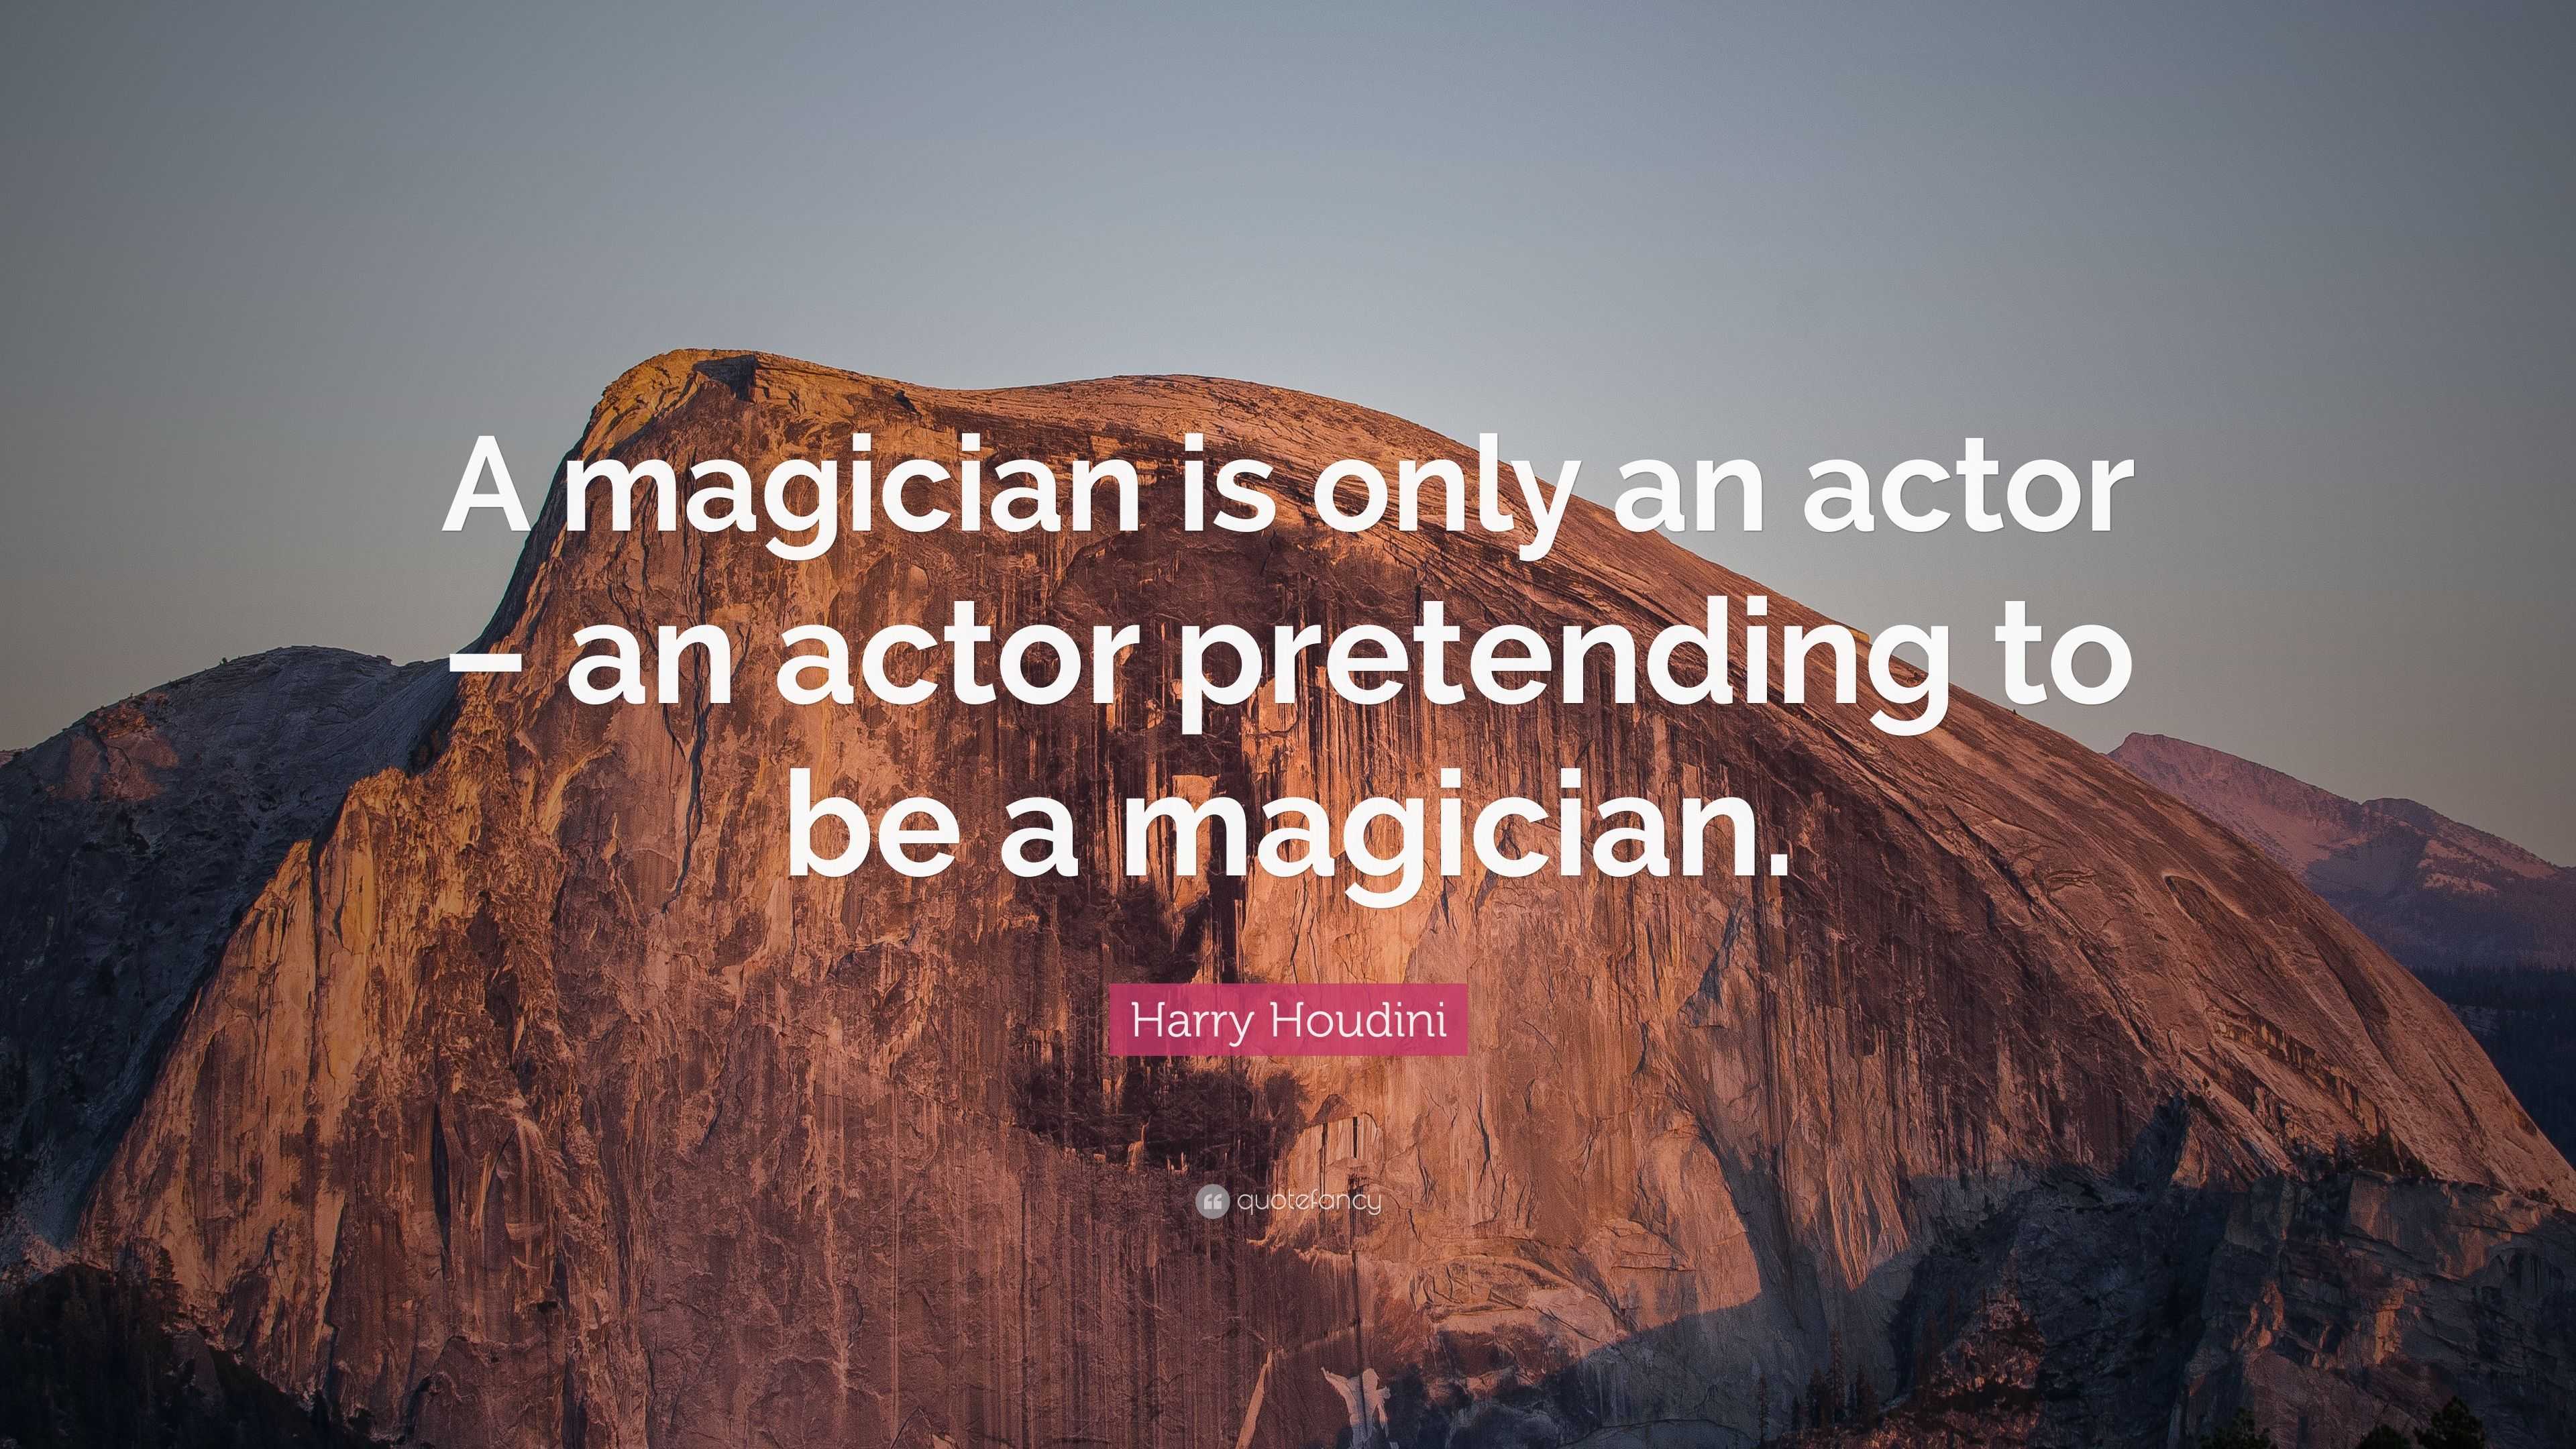 Harry Houdini Quote: “A magician is only an actor – an actor pretending